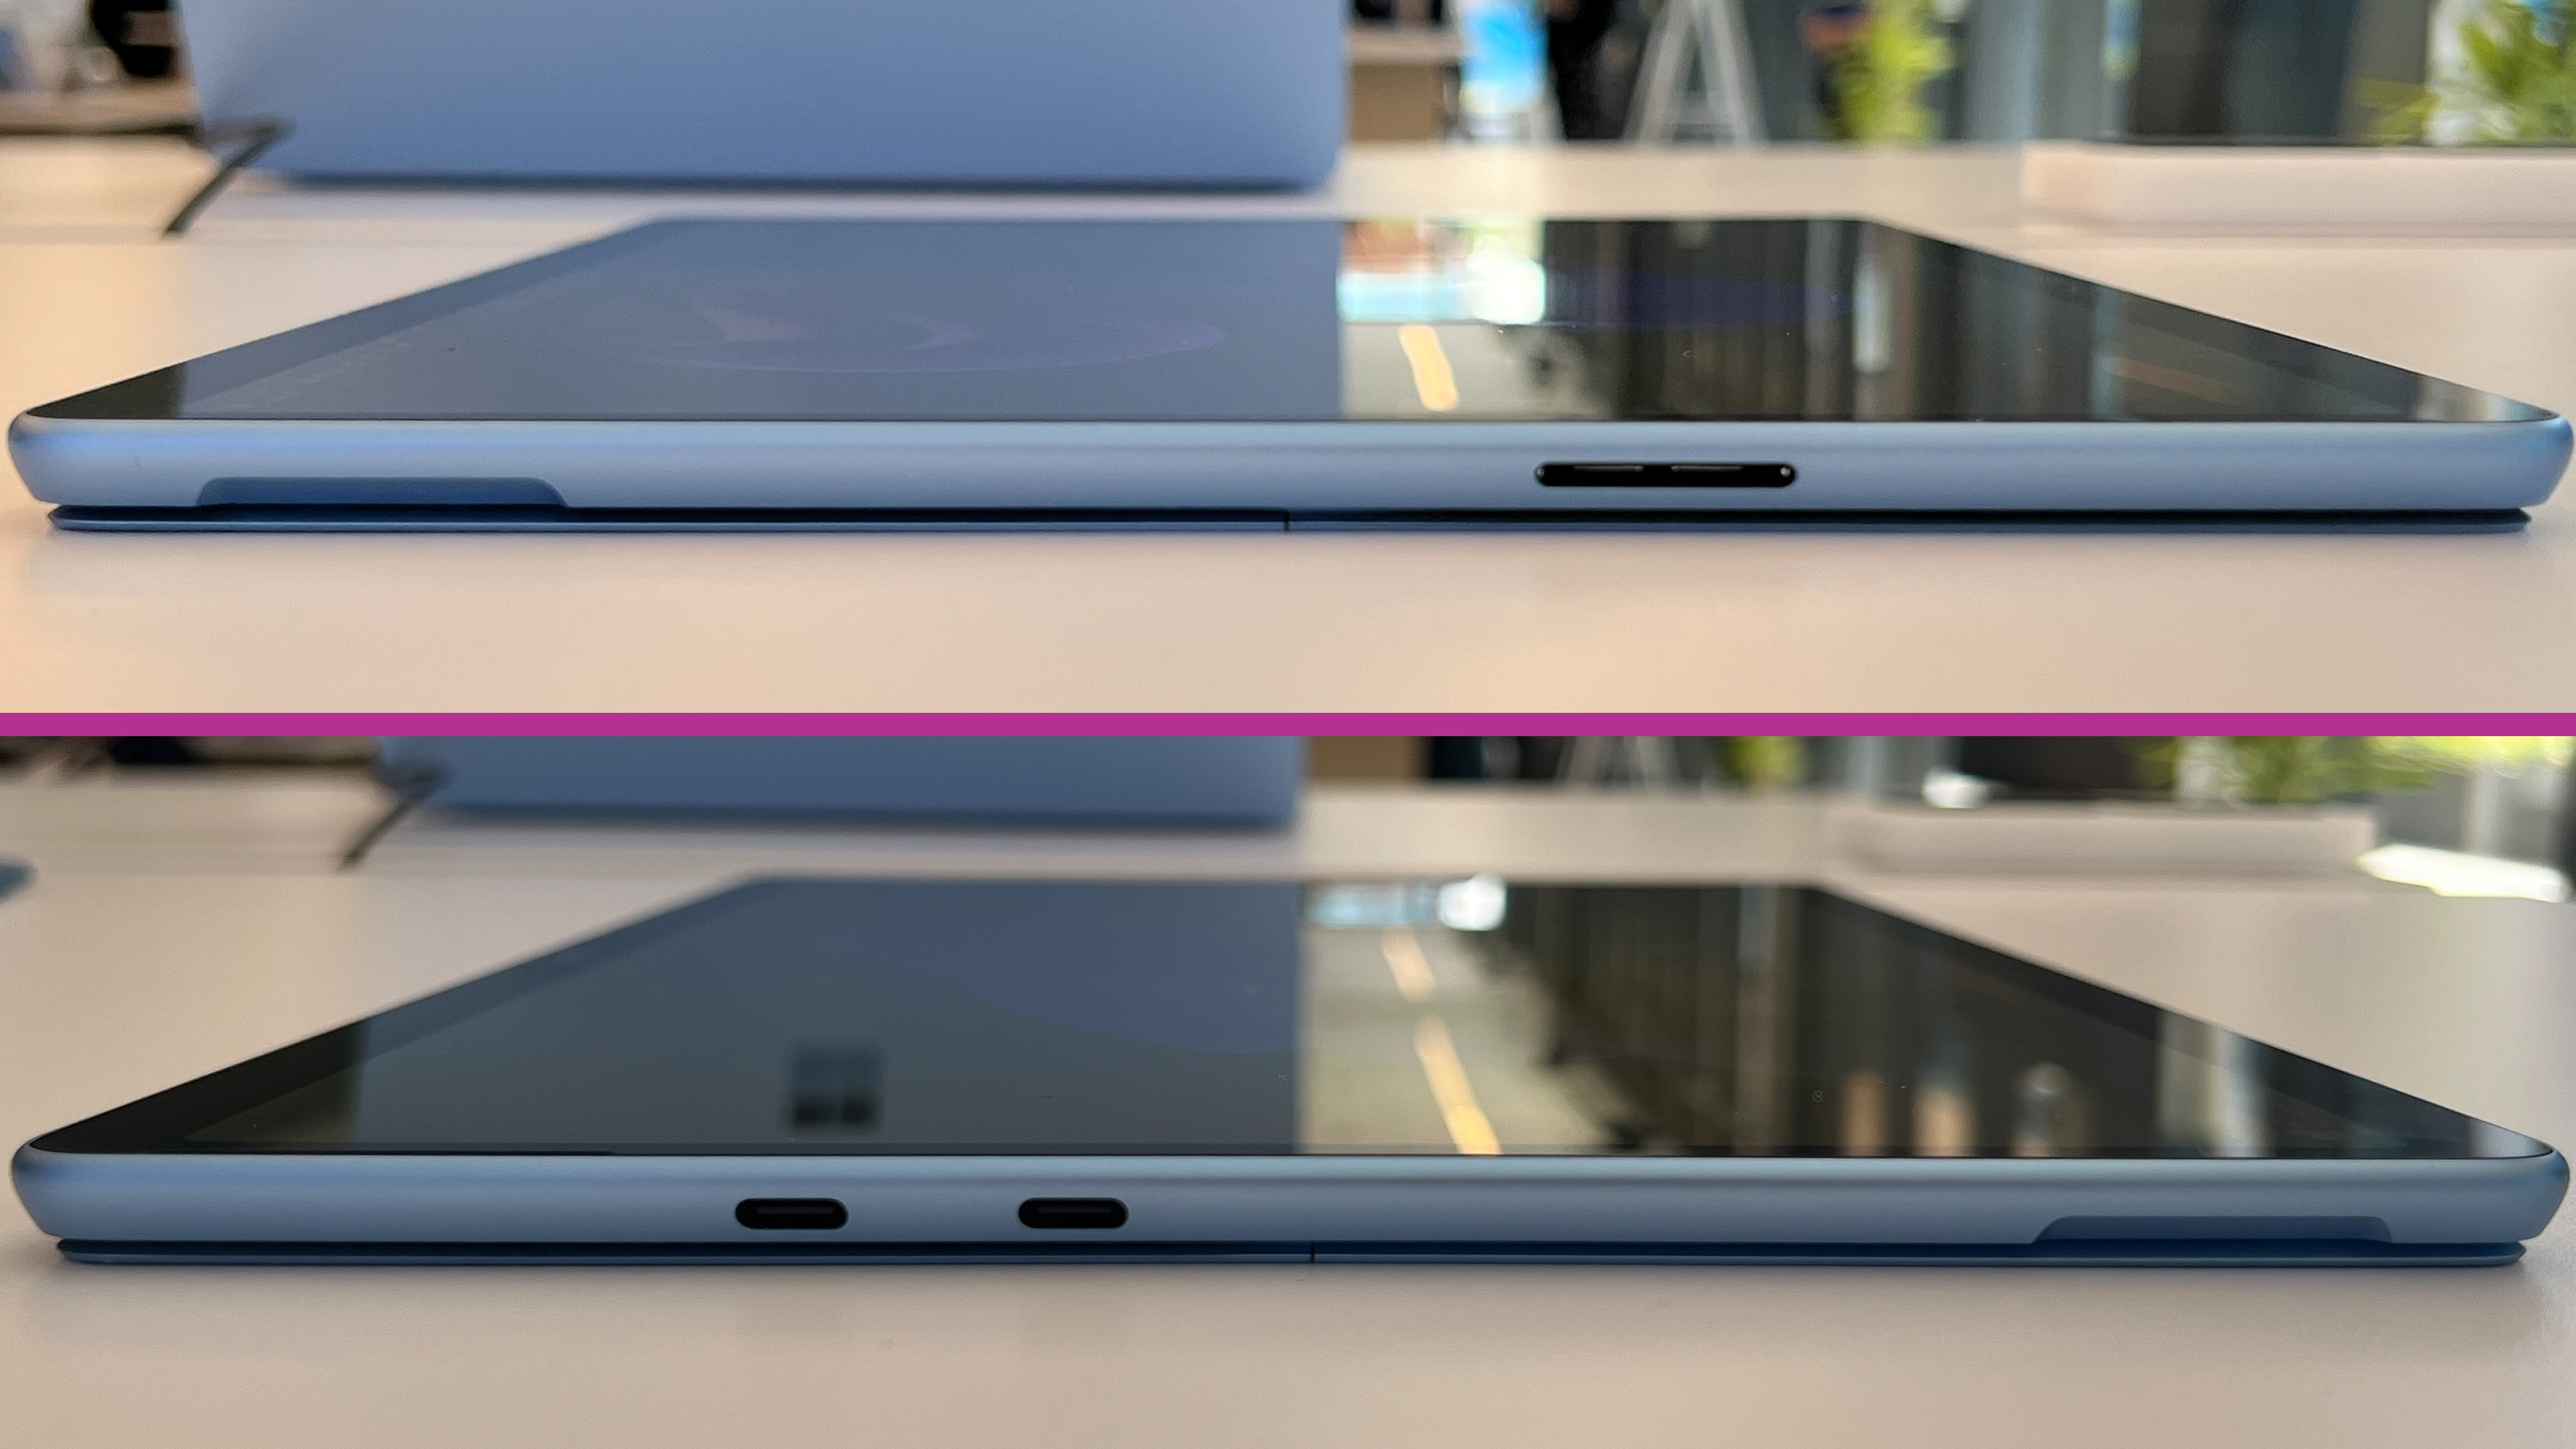 A composite image of the top and bottom sides of the Surface Pro